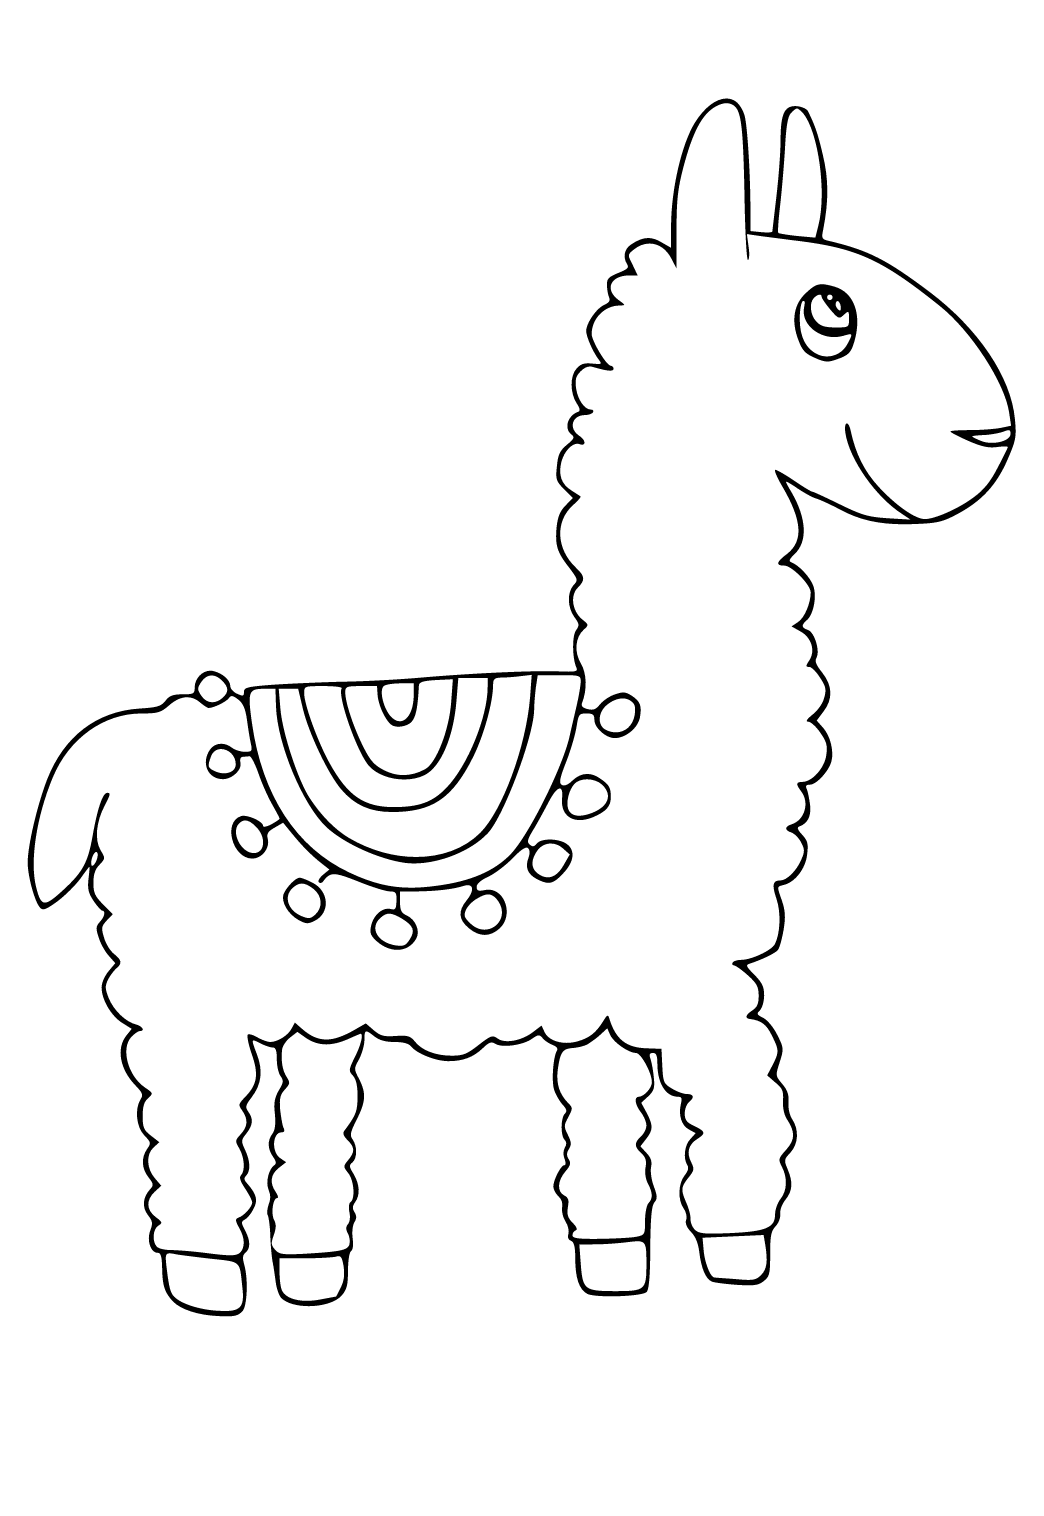 Free printable llama cute coloring page for adults and kids